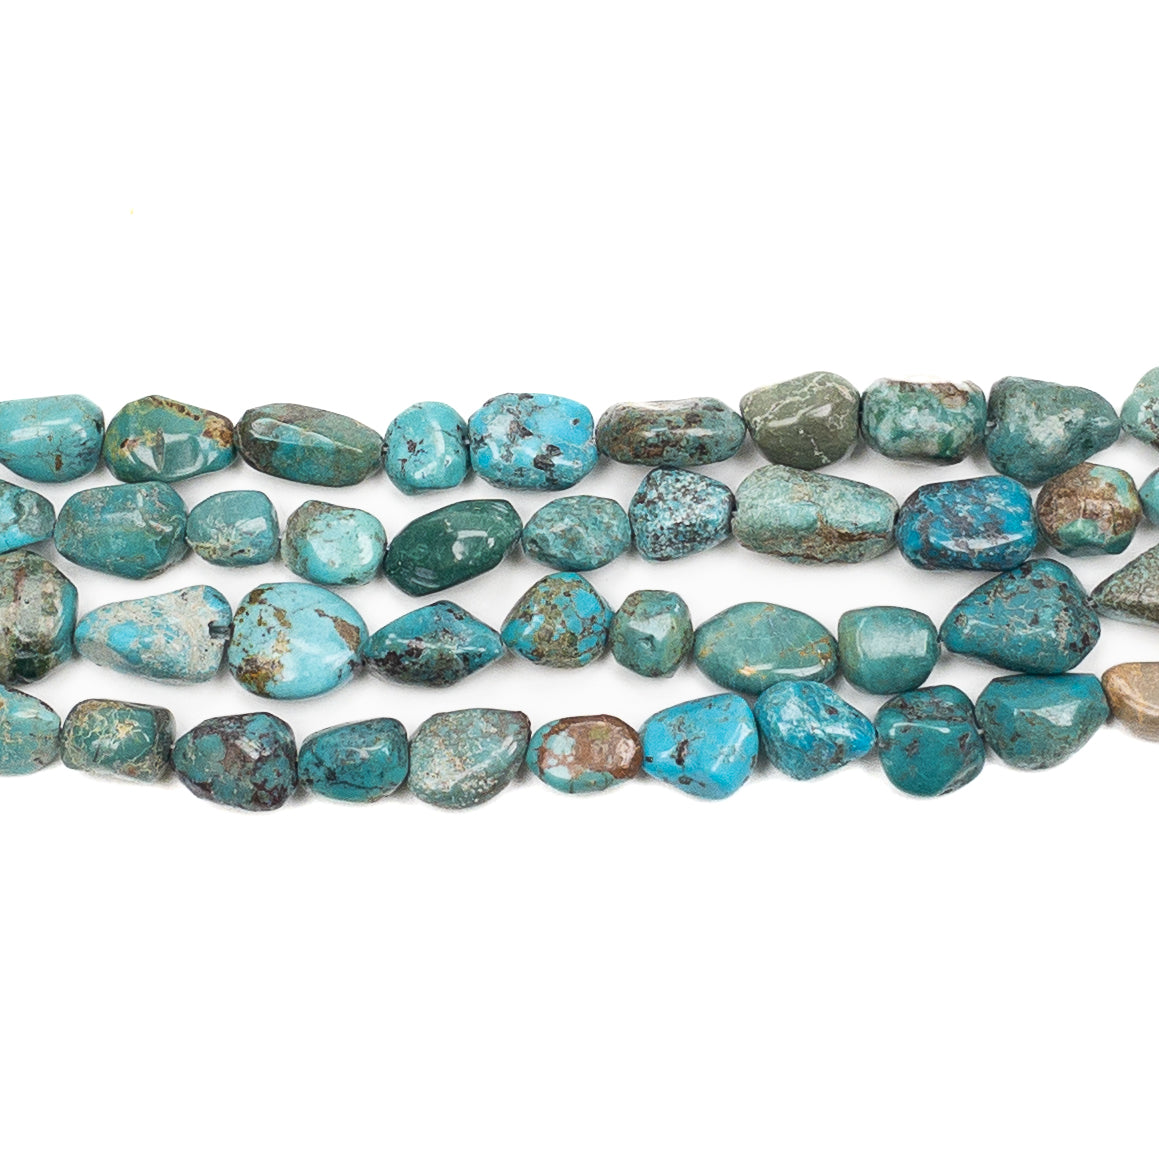 Chinese Turquoise Nugget Bead - 8" Strand